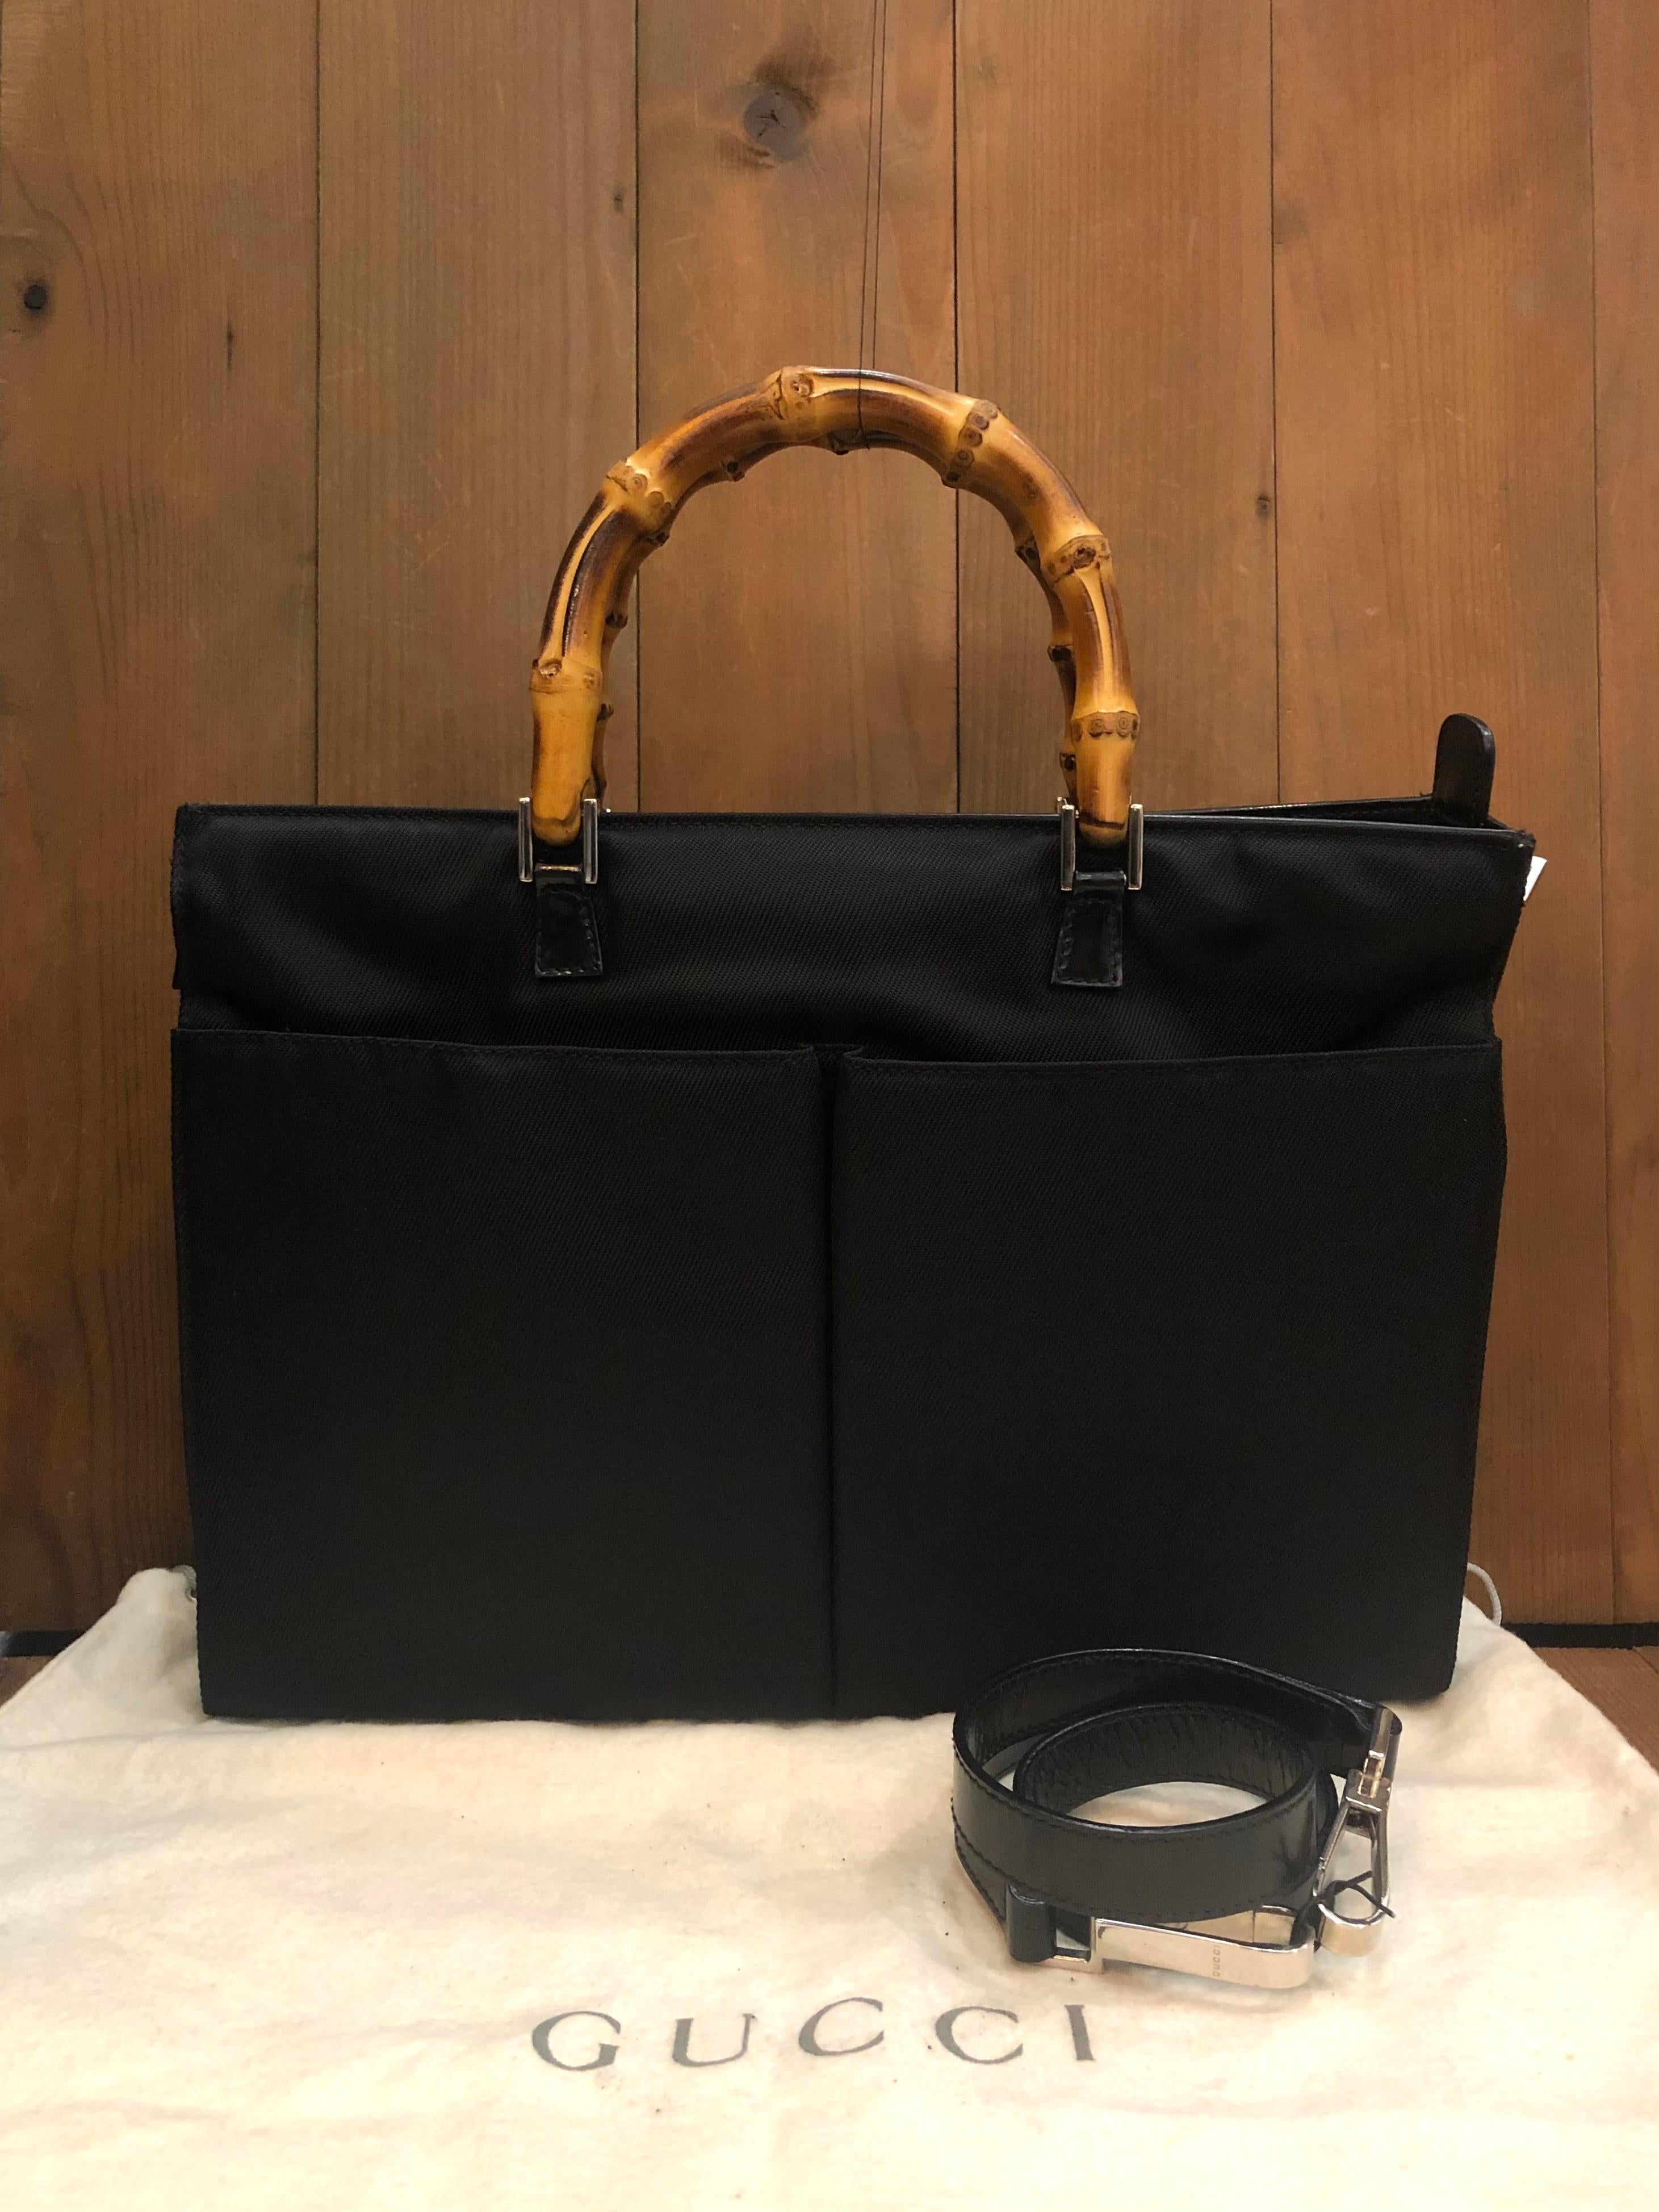 This vintage GUCCI Mini bamboo briefcase handbag is crafted of nylon and smooth calfskin leather in black featuring silver toned hardware and bamboo handles. Top zipper closure opens to a black diamanté jacquard interior featuring a zippered pocket.